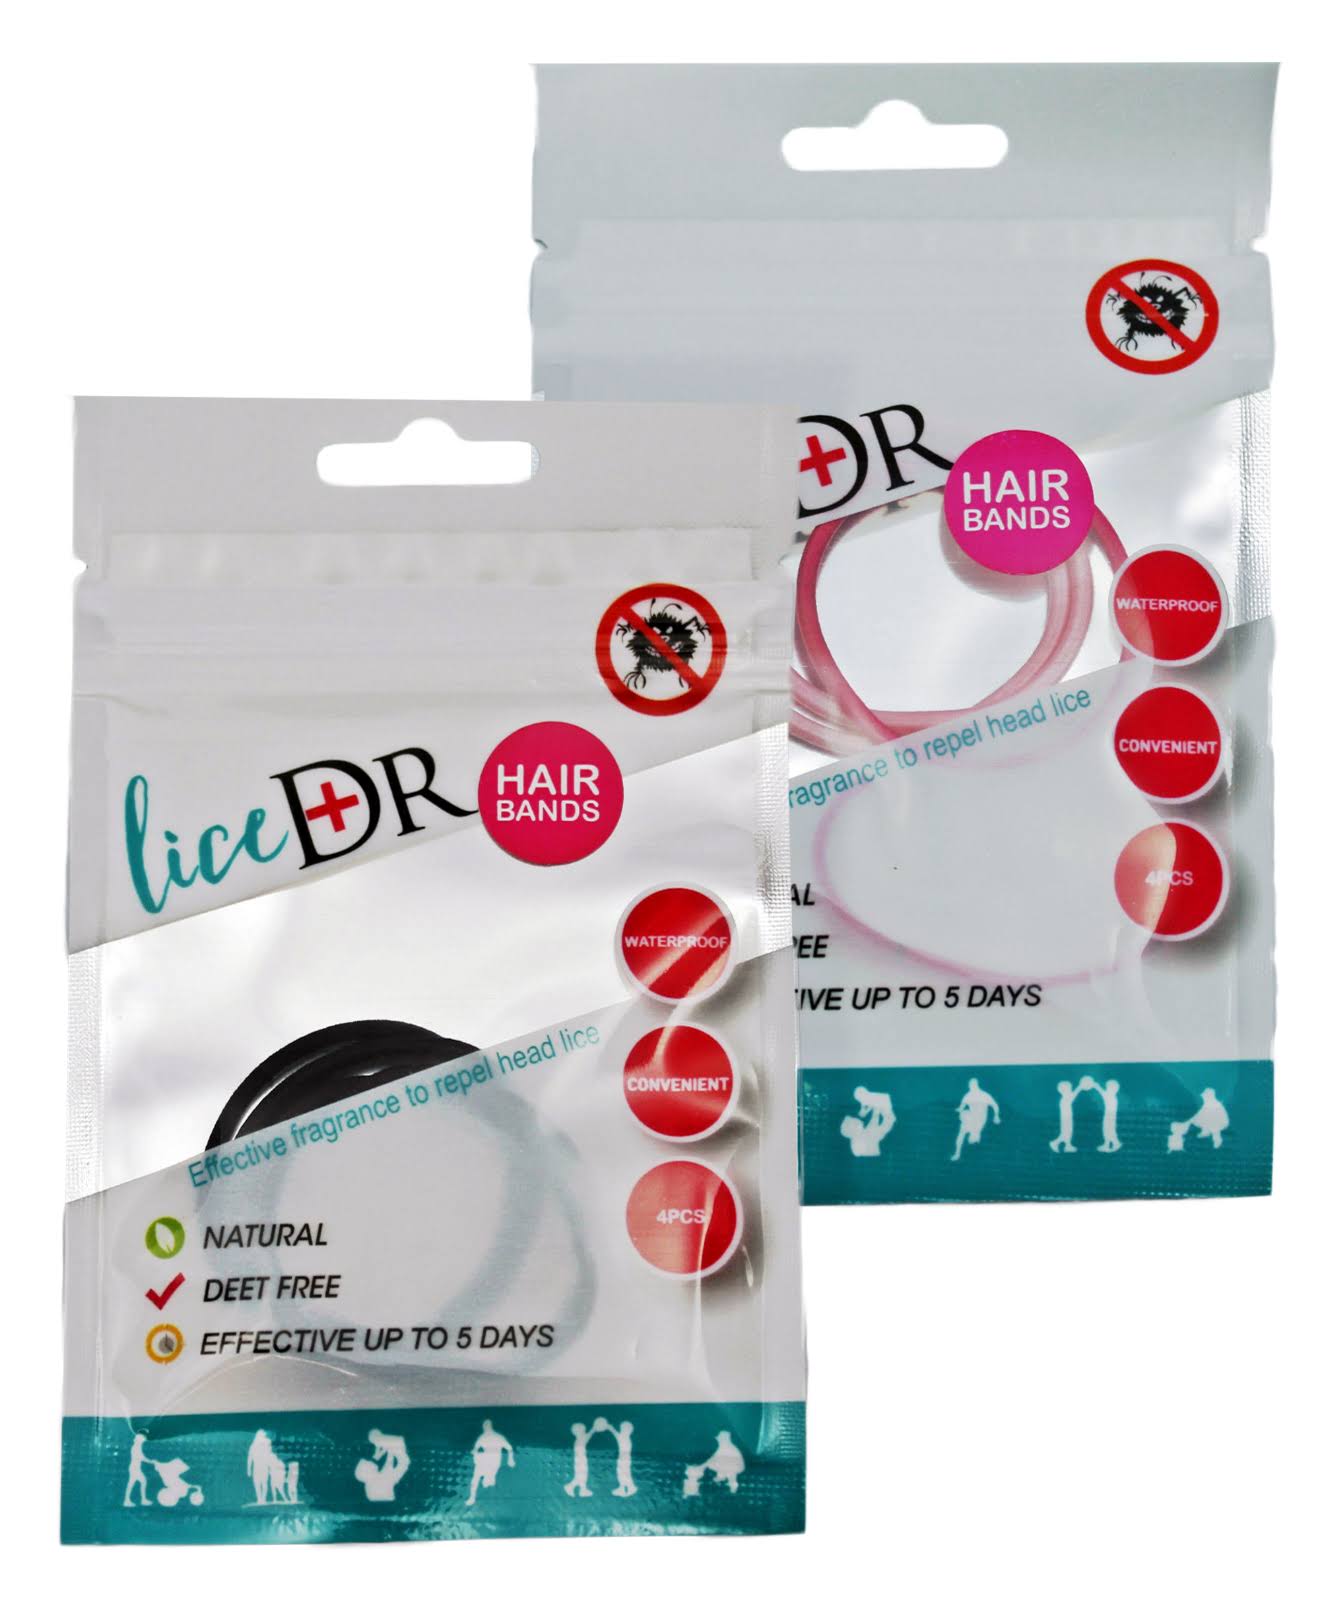 Lice DR Hair Bands